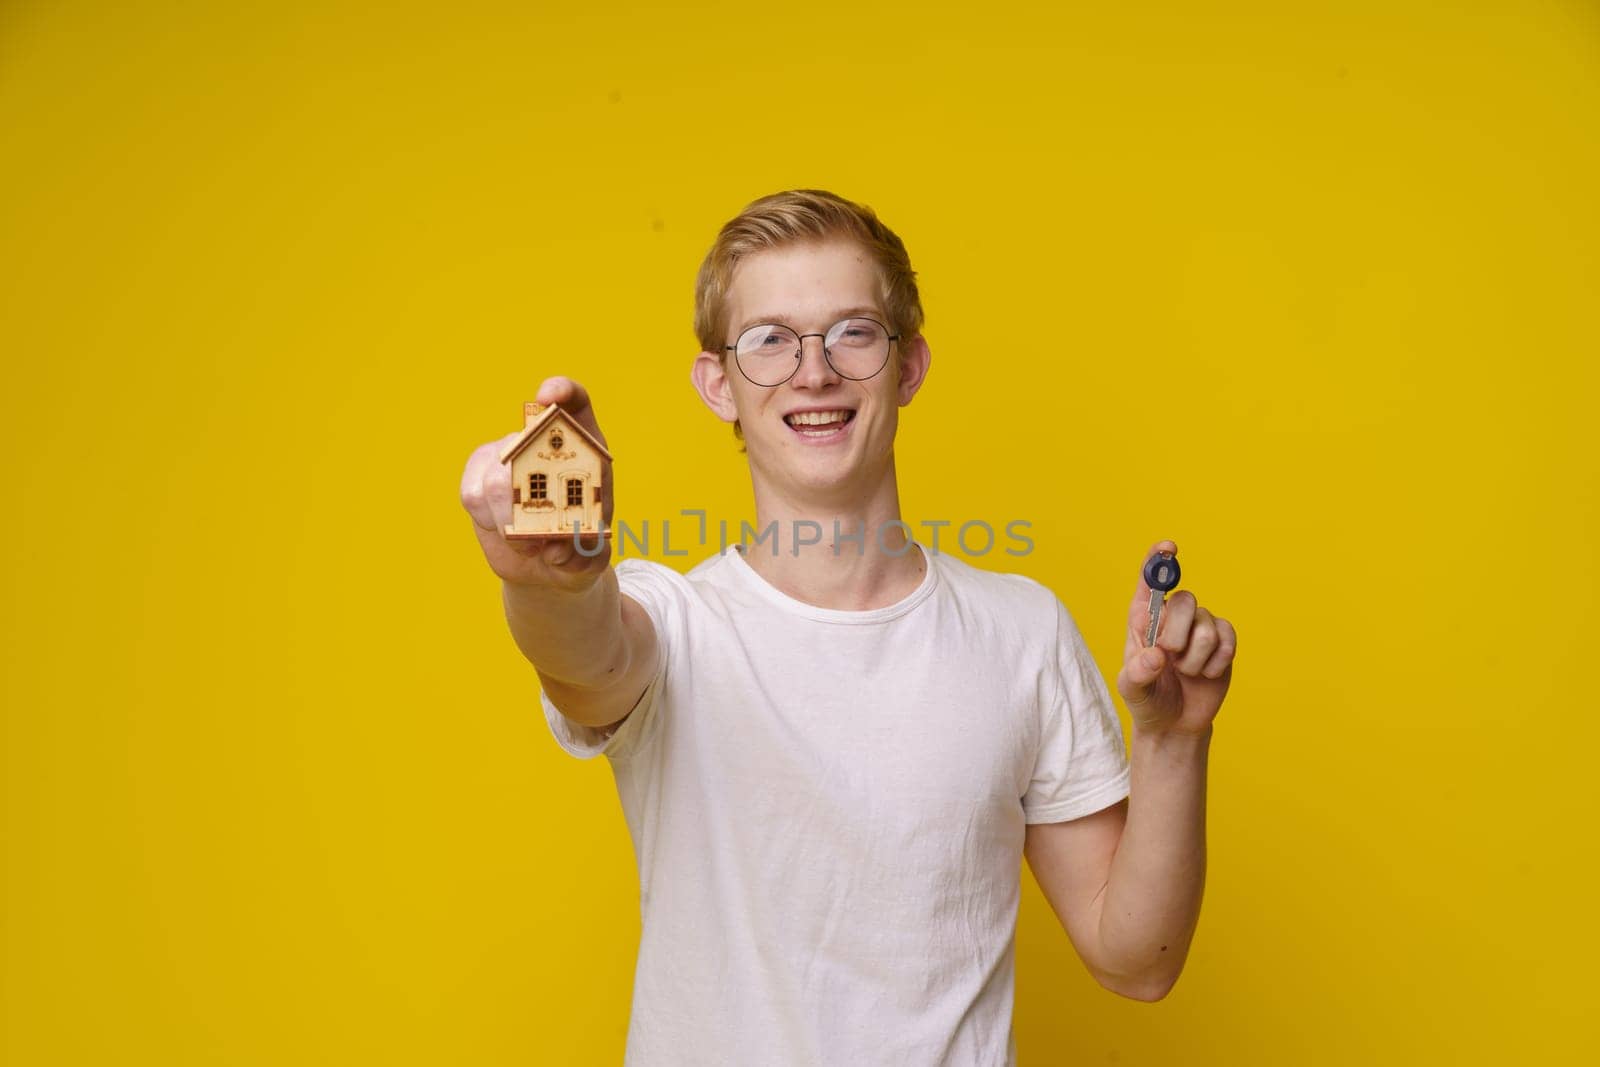 nerdy individual with glasses is holding a mock-up of a house and a key to housing on a bright yellow background. The focus is on the hand holding the house, representing the concept of real estate investment, homeownership, and financial success through hard work and education. High quality photo